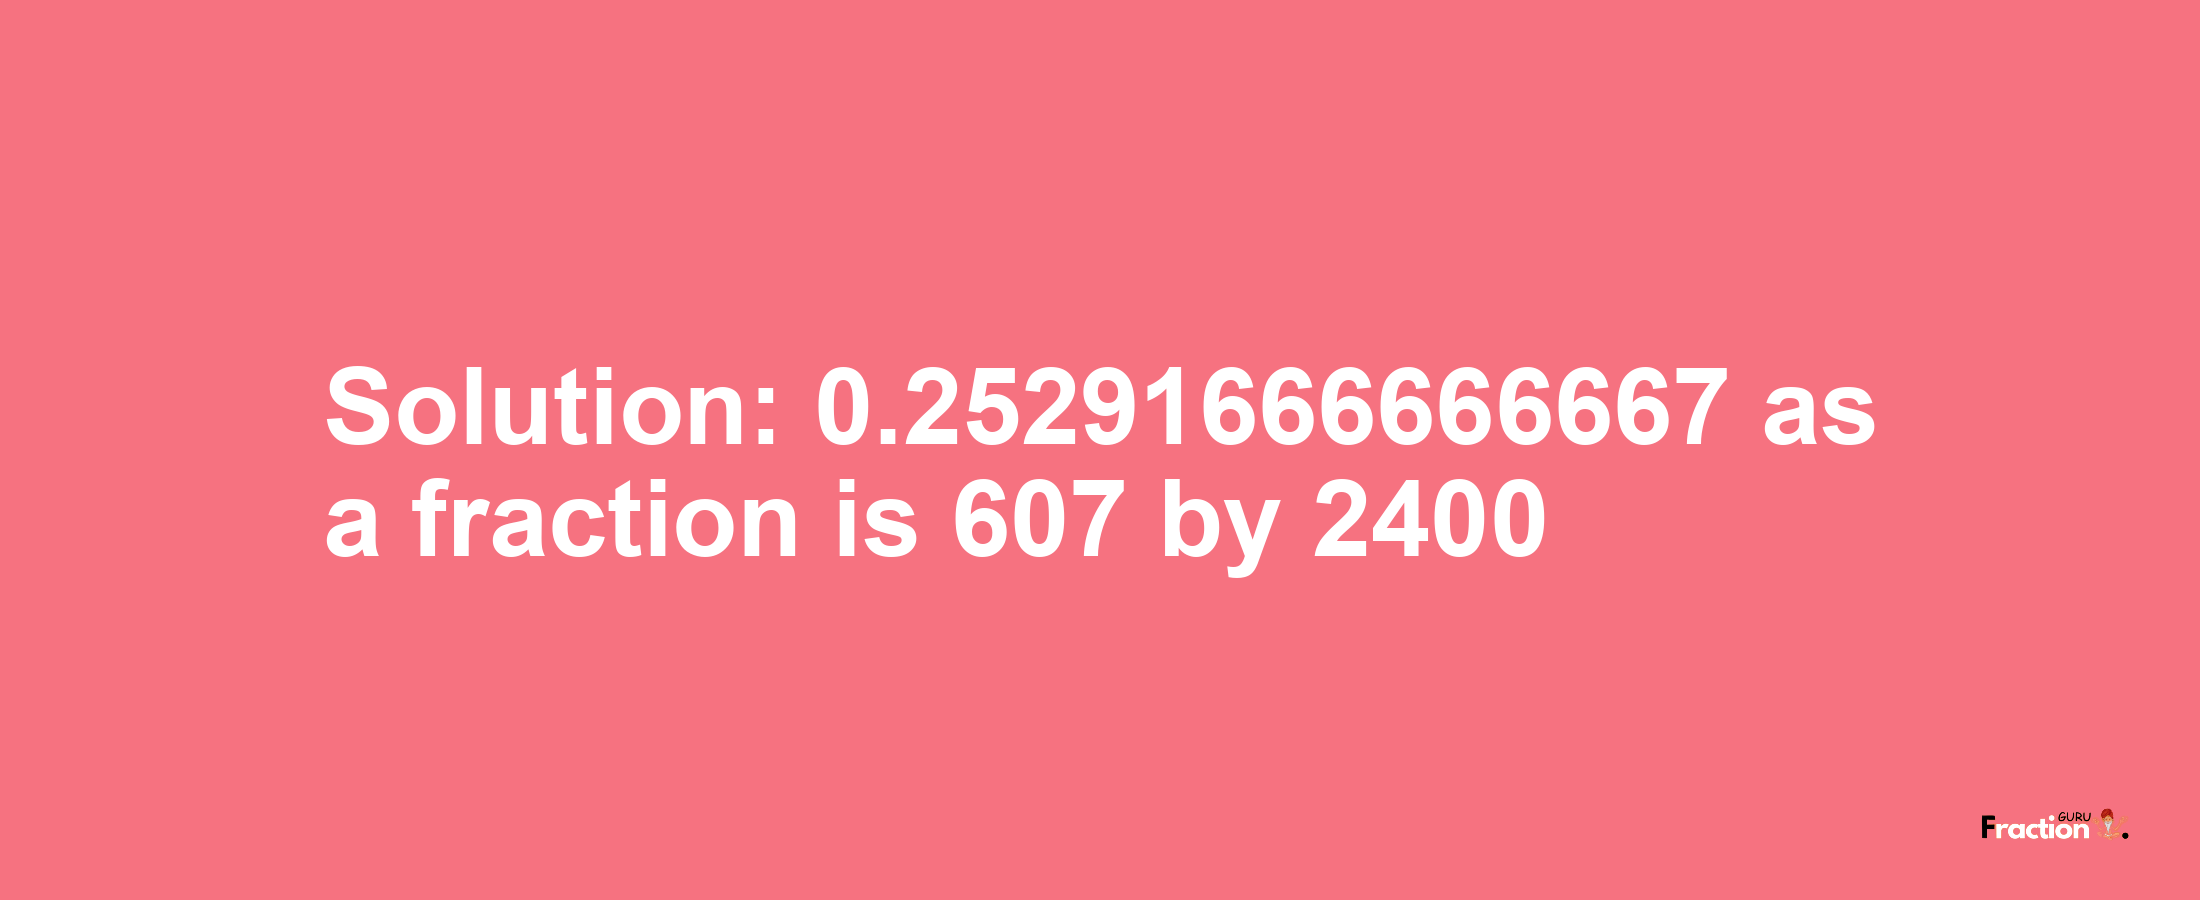 Solution:0.25291666666667 as a fraction is 607/2400